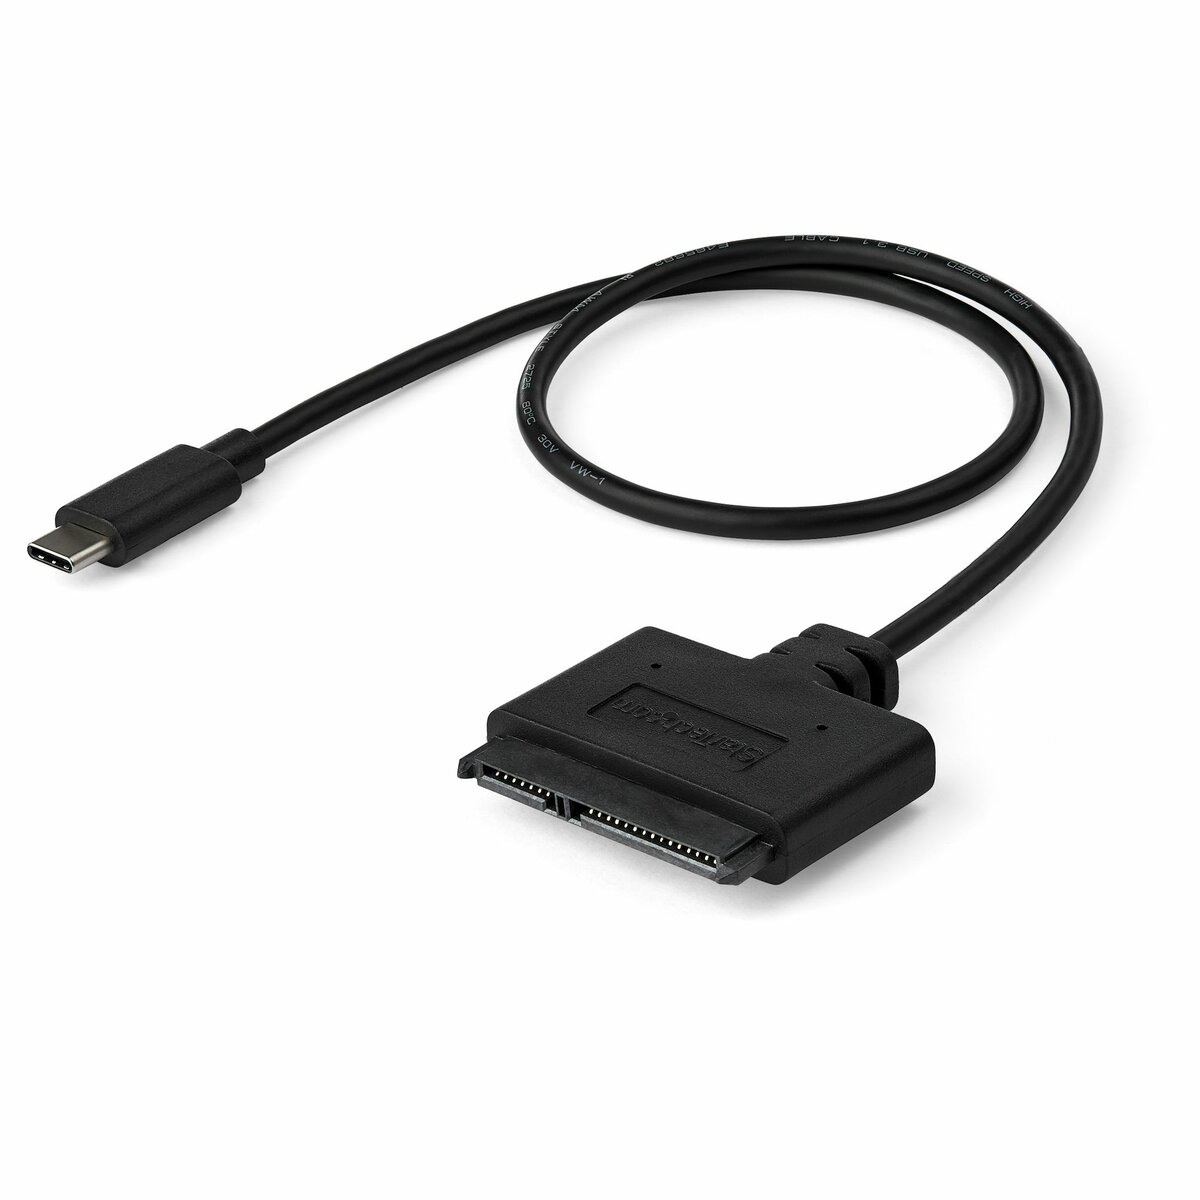 Putte Korridor Mission StarTech.com USB C to SATA Adapter - External Hard Drive Connector for  2.5'' SATA Drives - SATA SSD / HDD to USB C Cable (USB31CSAT3CB)